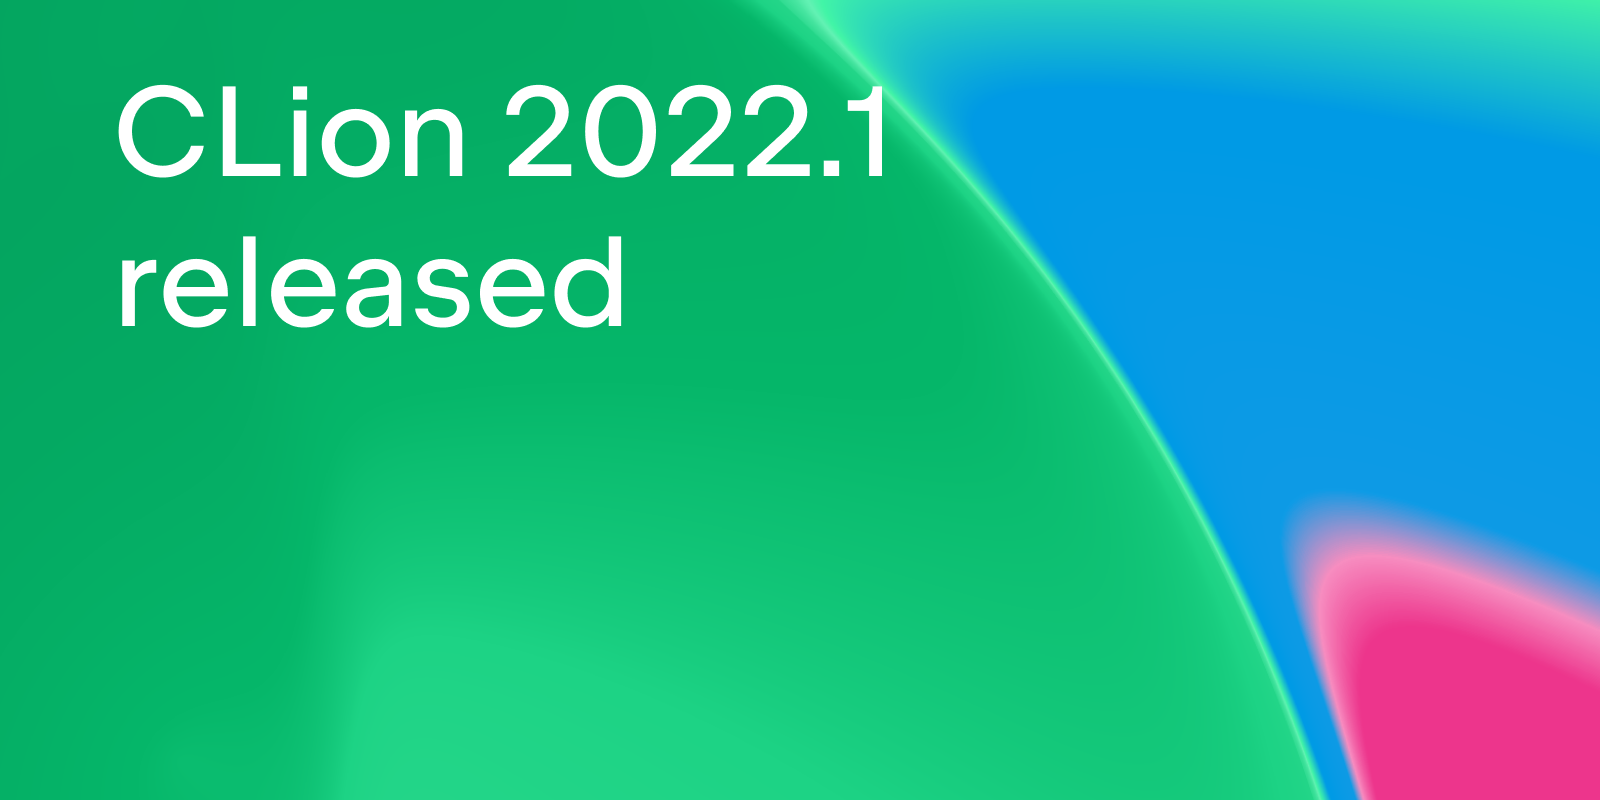 CLion 2022.1 released